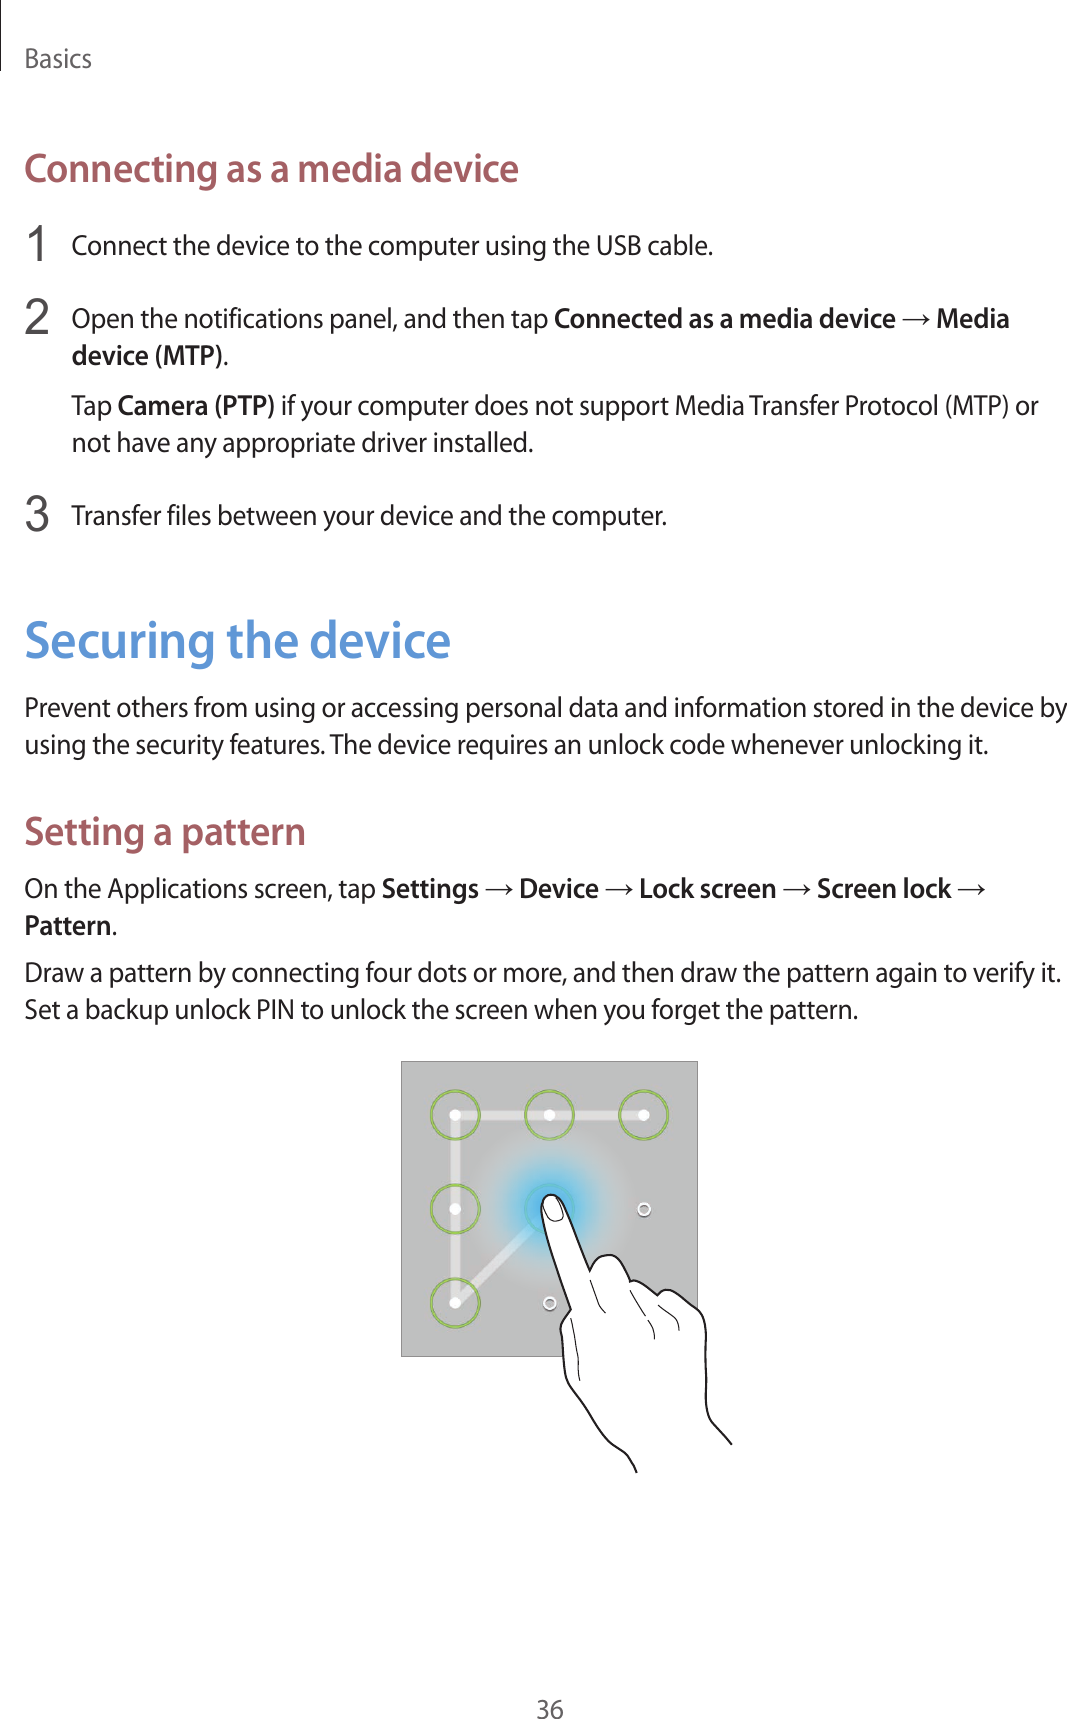 Basics36Connecting as a media device1  Connect the device to the computer using the USB cable.2  Open the notifications panel, and then tap Connected as a media device → Media device (MTP).Tap Camera (PTP) if your computer does not support Media Transfer Protocol (MTP) or not have any appropriate driver installed.3  Transfer files between your device and the computer.Securing the devicePrevent others from using or accessing personal data and information stored in the device by using the security features. The device requires an unlock code whenever unlocking it.Setting a patternOn the Applications screen, tap Settings → Device → Lock screen → Screen lock → Pattern.Draw a pattern by connecting four dots or more, and then draw the pattern again to verify it. Set a backup unlock PIN to unlock the screen when you forget the pattern.